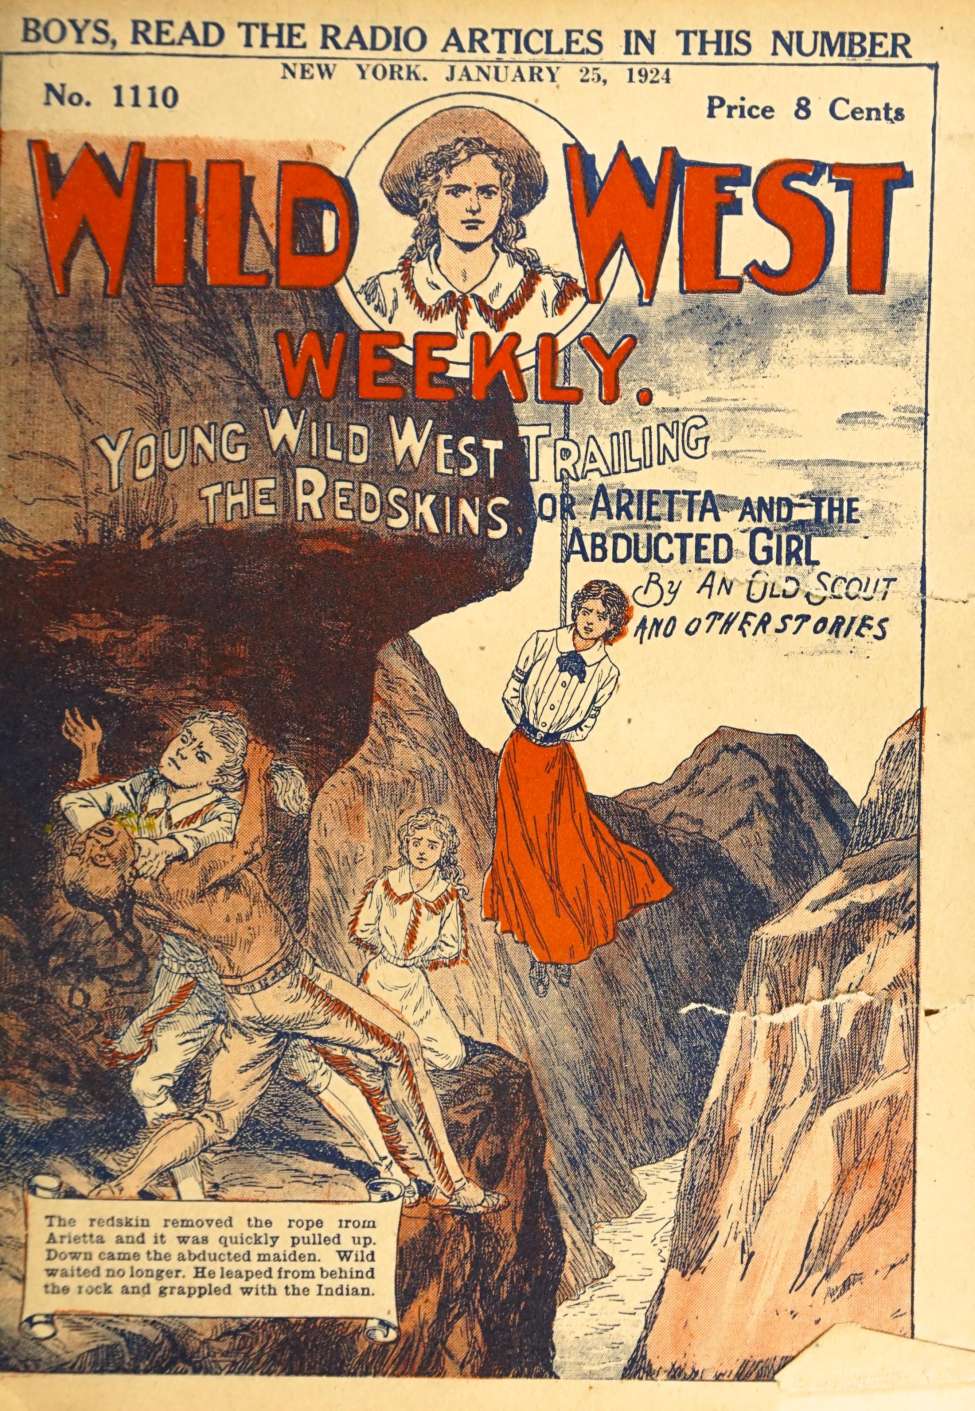 Book Cover For Wild West Weekly 1110 - Young Wild West Trailing the Redskins